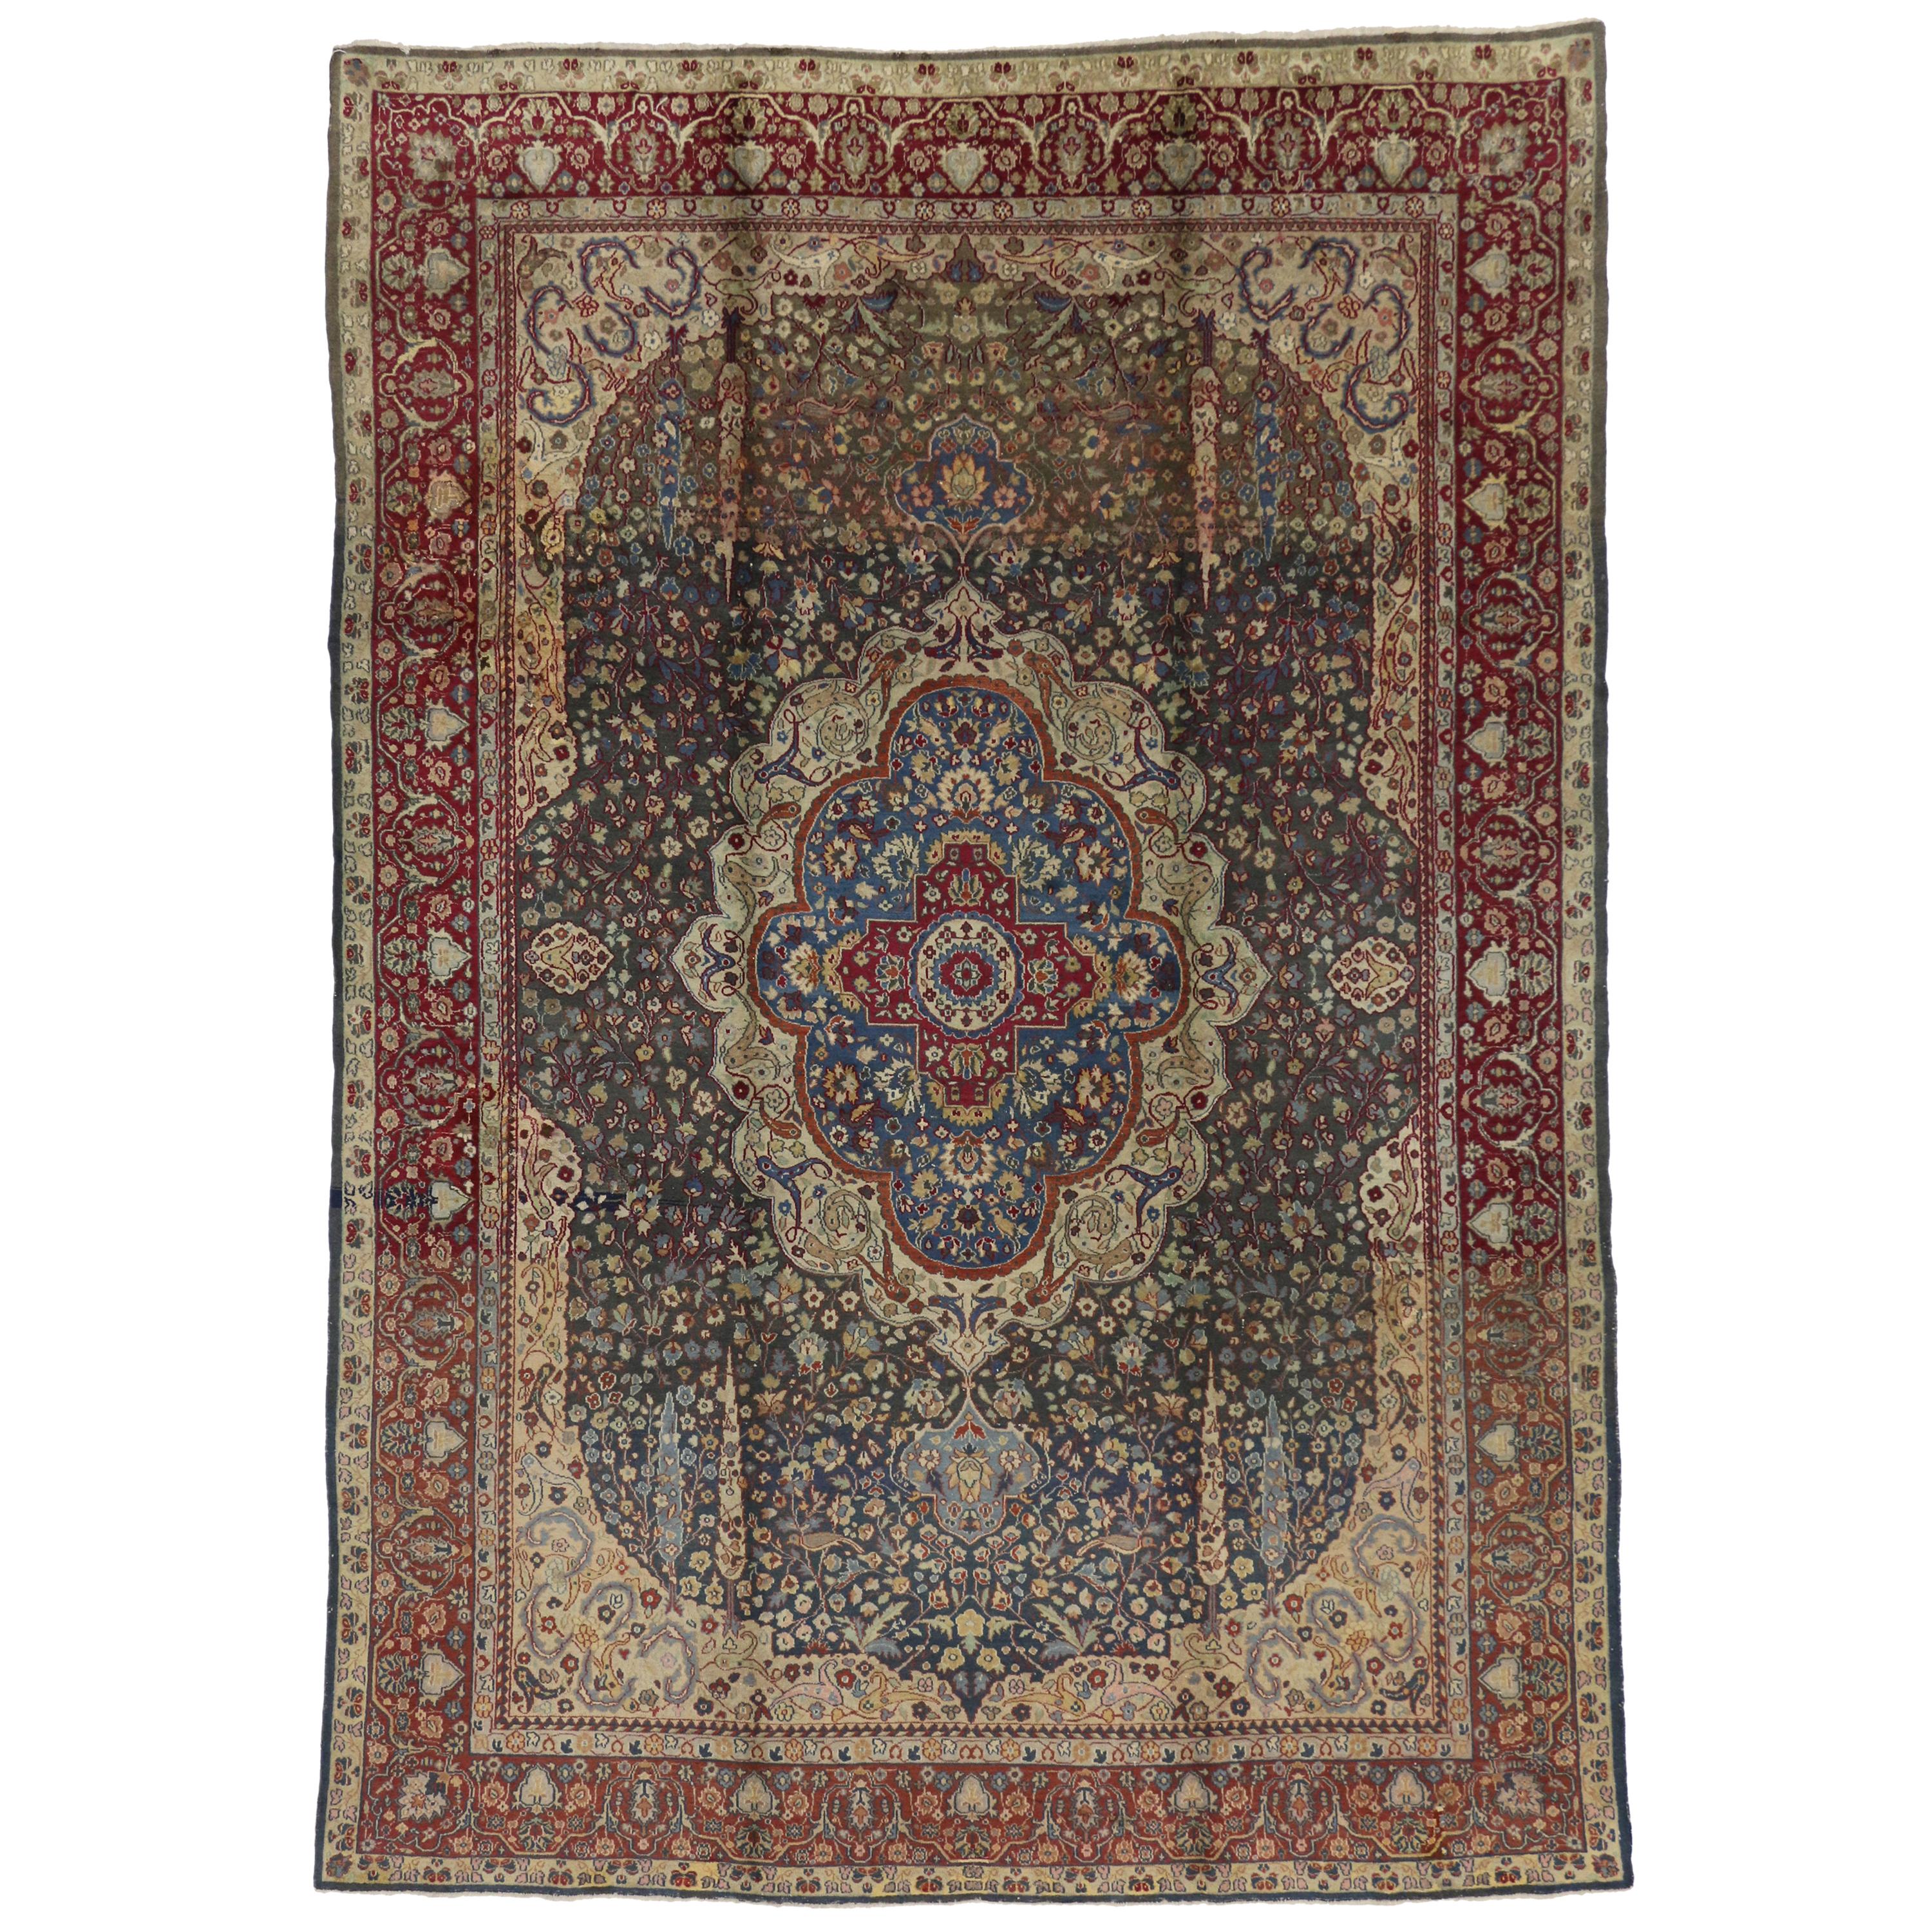 Antique Indian Agra Rug with Cypress Trees